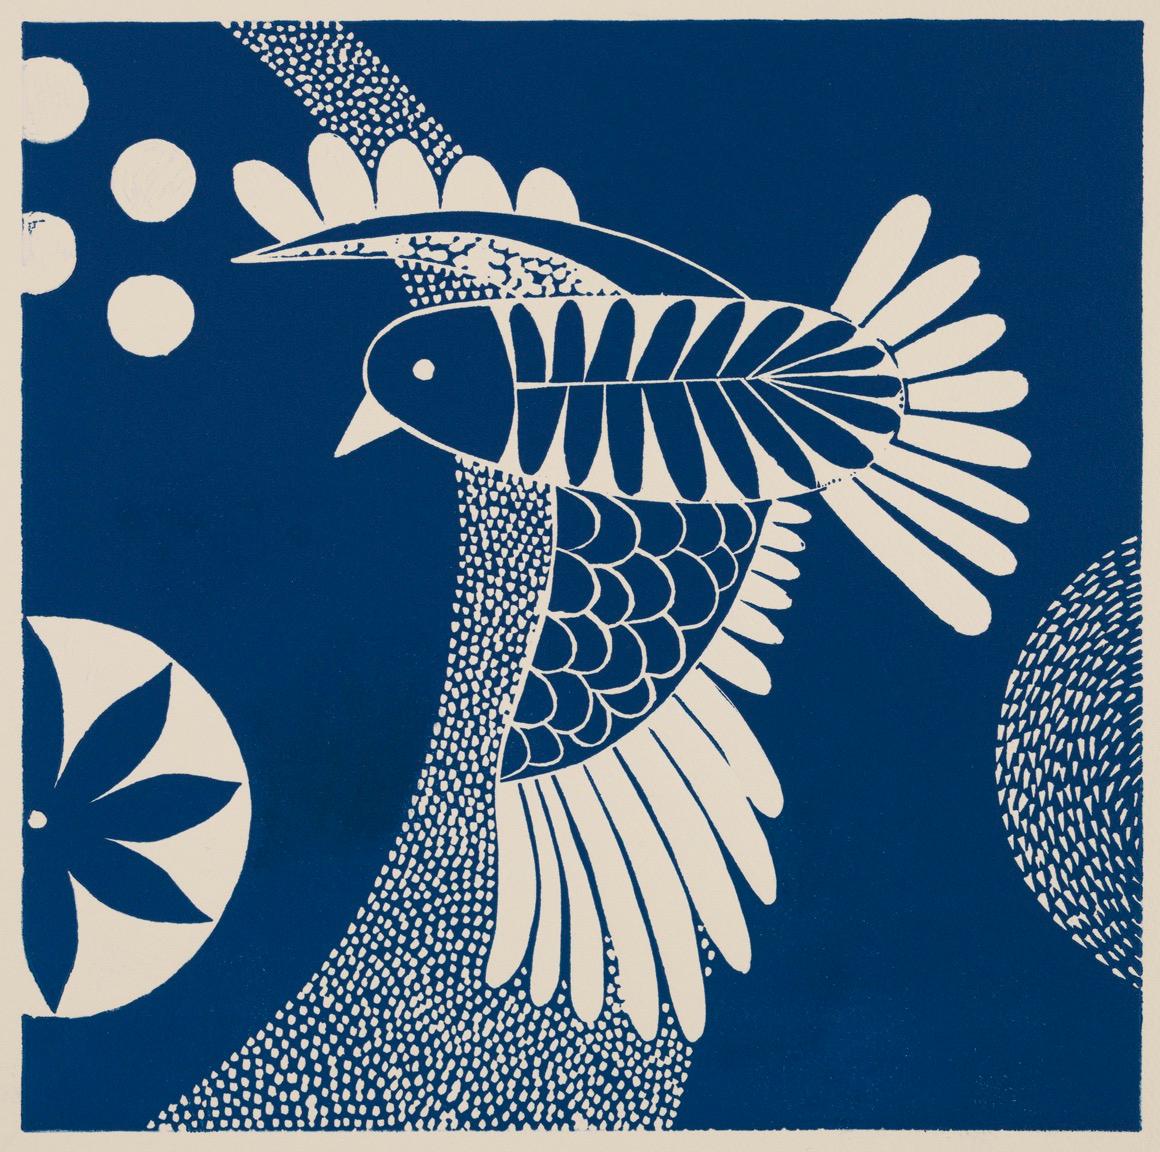 'Chittering and Chattering IV'  Linoleum Block Print,  Edition 10,  11 5/8 x 11 5/8 Inches,  is one of a series of 6 related prints in this size in varying shades of blue.   Sold individually or as sets of 2, 3, 4, 5 or 6.

There is also a series of